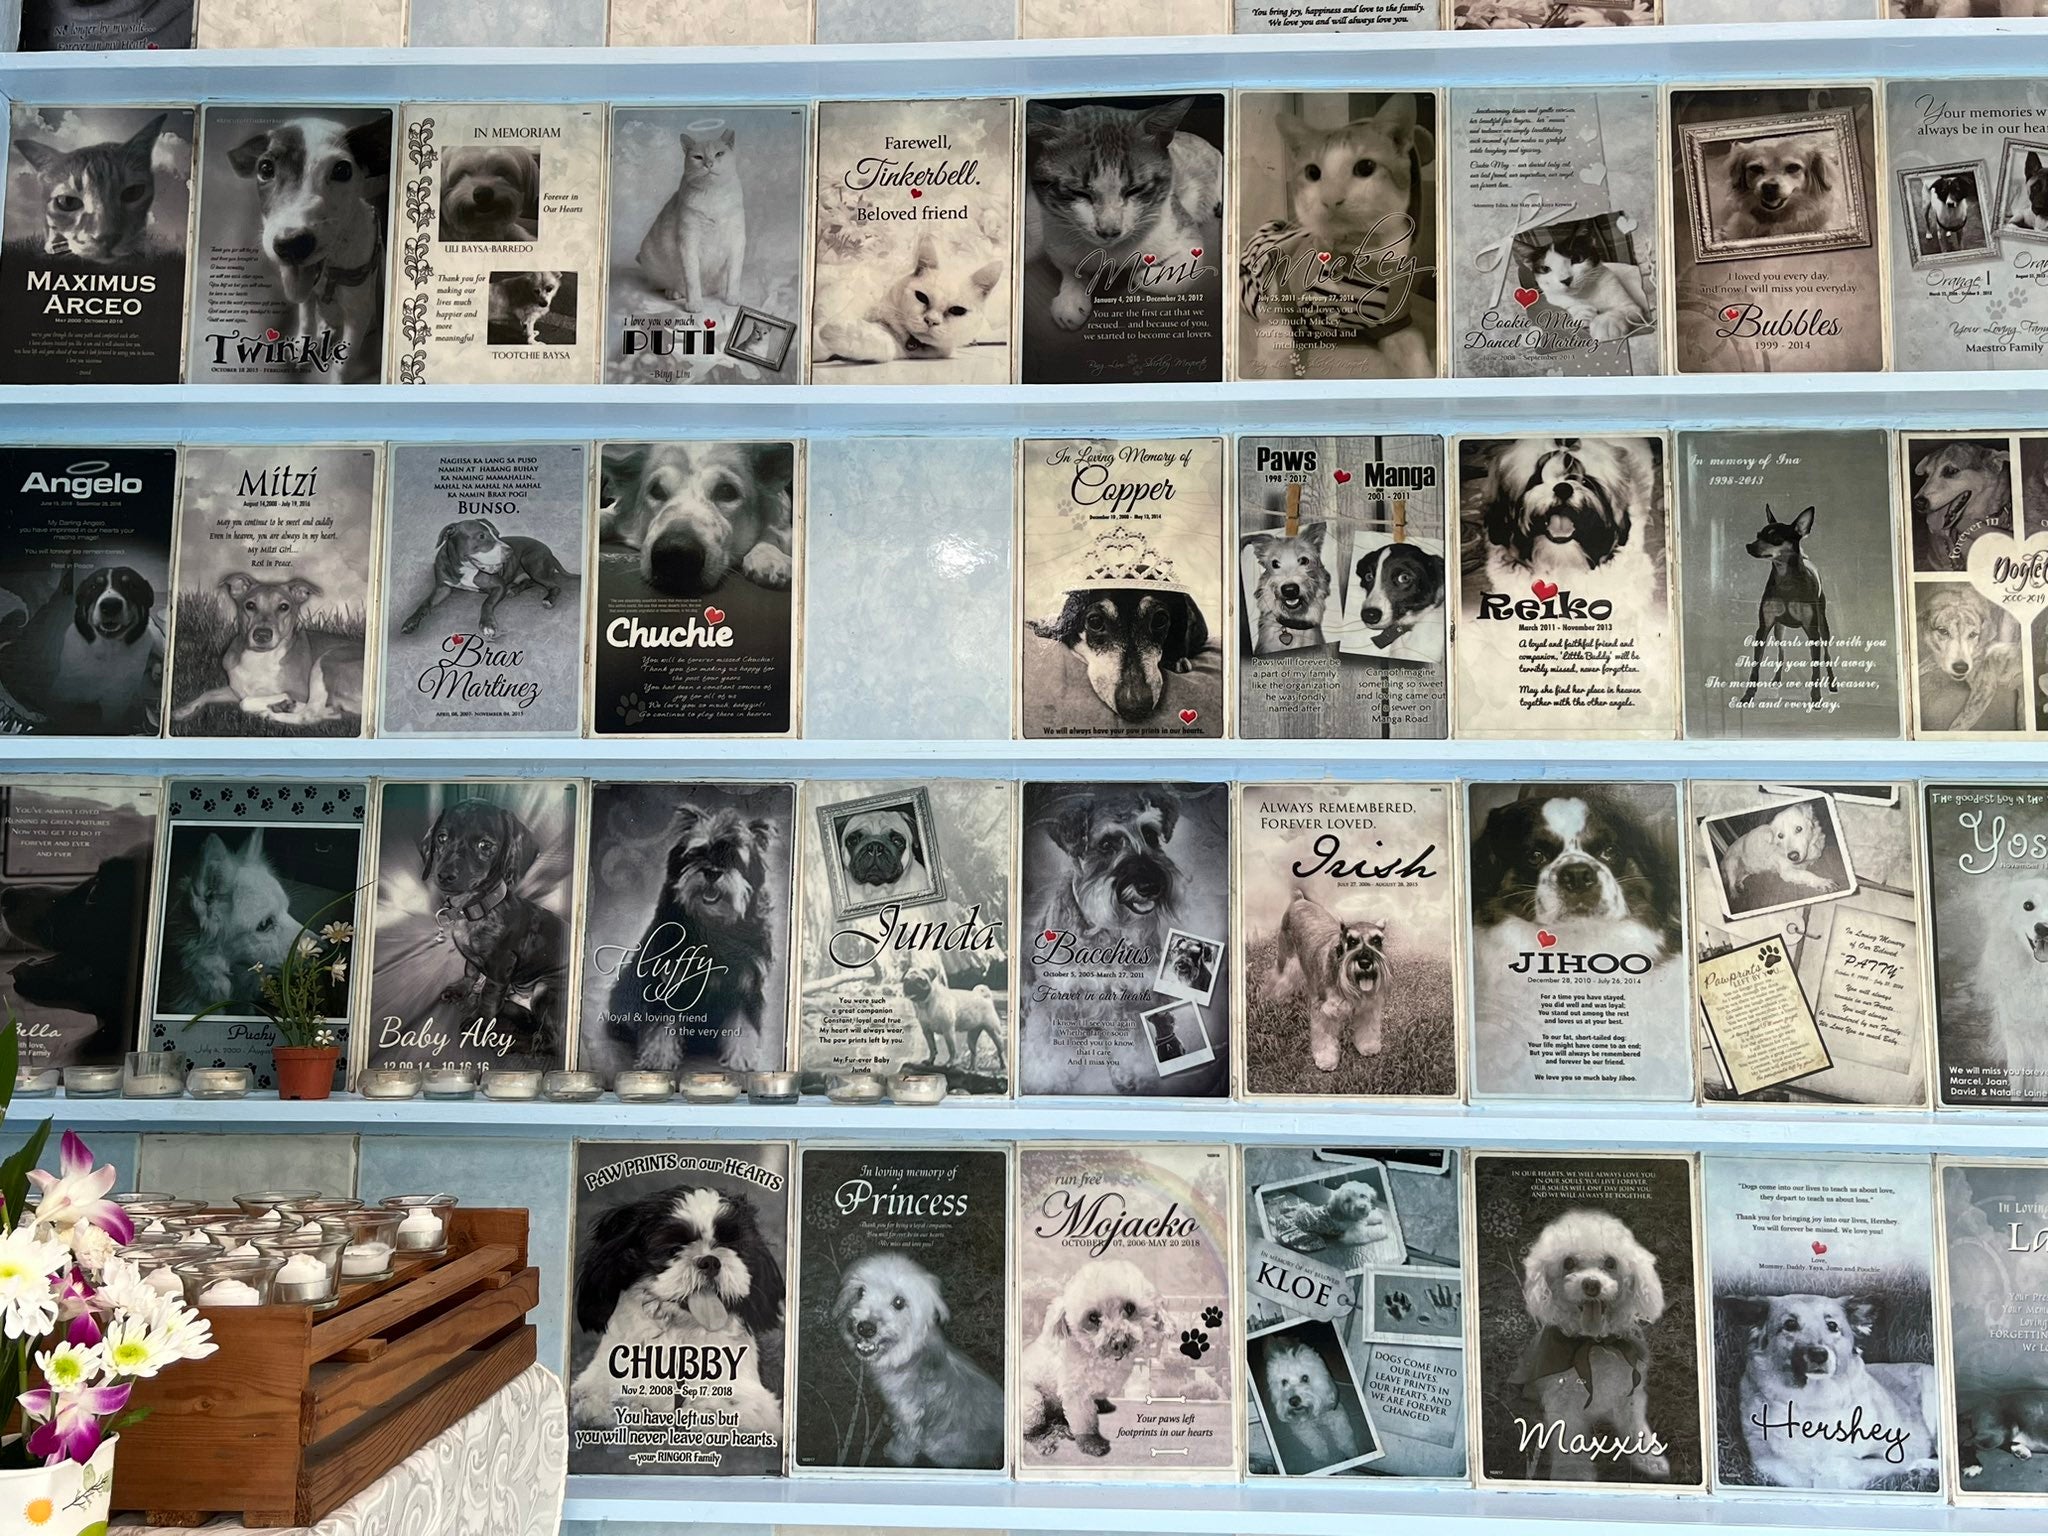 Reliving good times with beloved pets through PAWS memorial wall